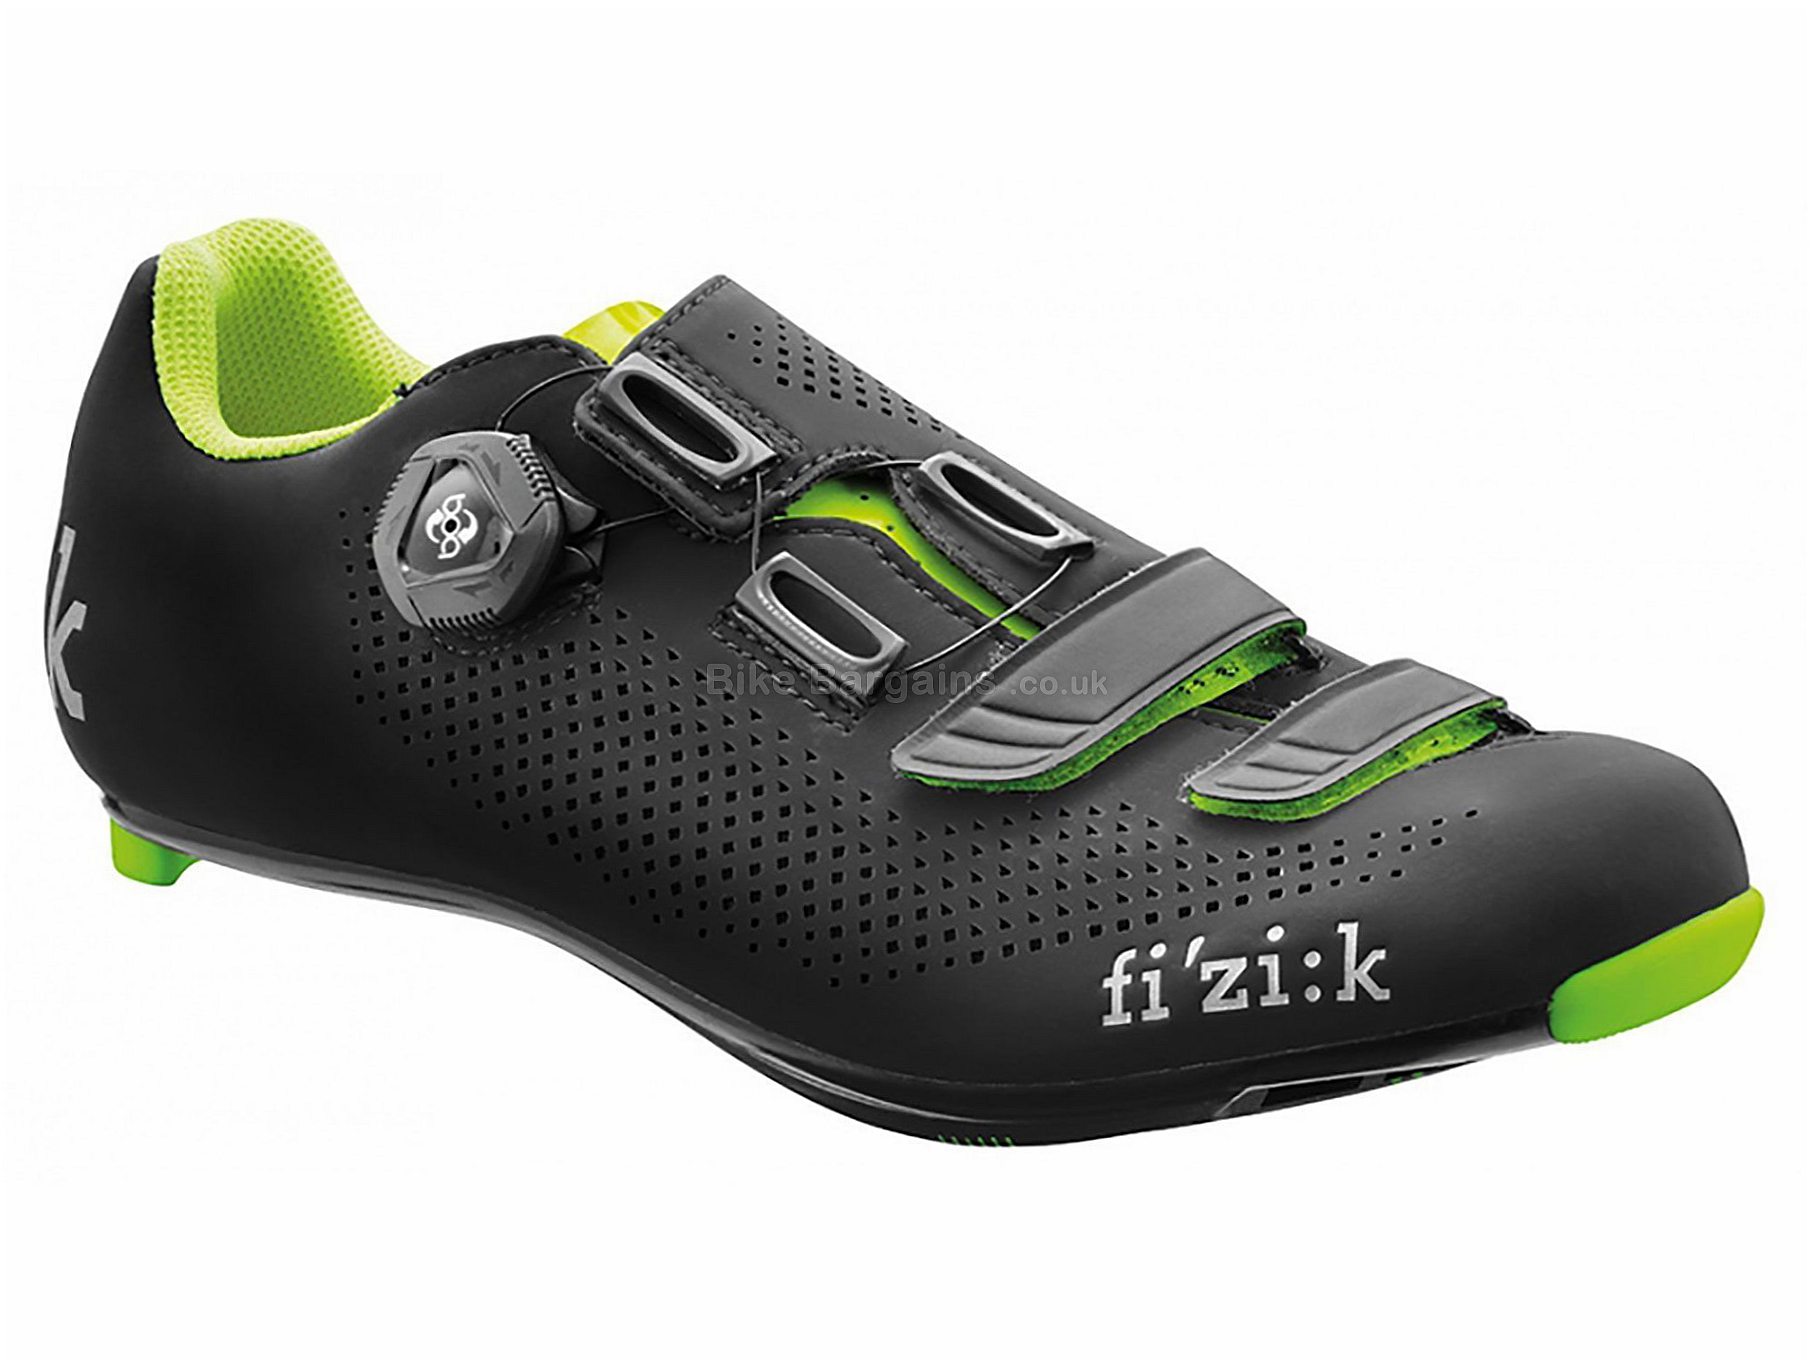 Fizik R4B Uomo Road Shoes (Expired) was £95